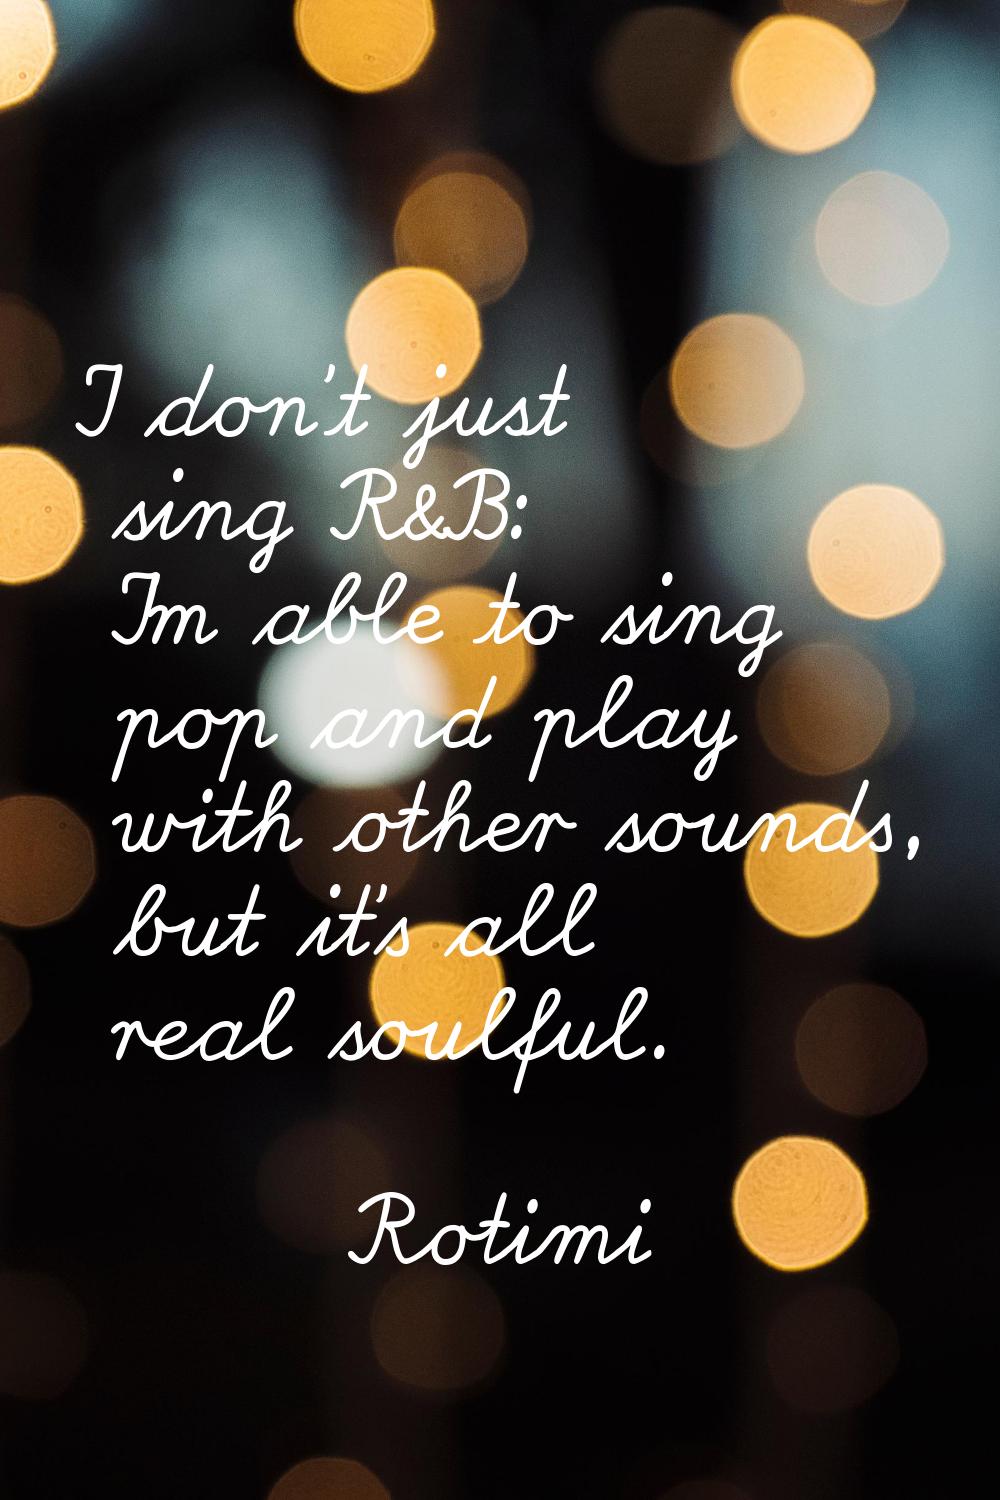 I don't just sing R&B: I'm able to sing pop and play with other sounds, but it's all real soulful.